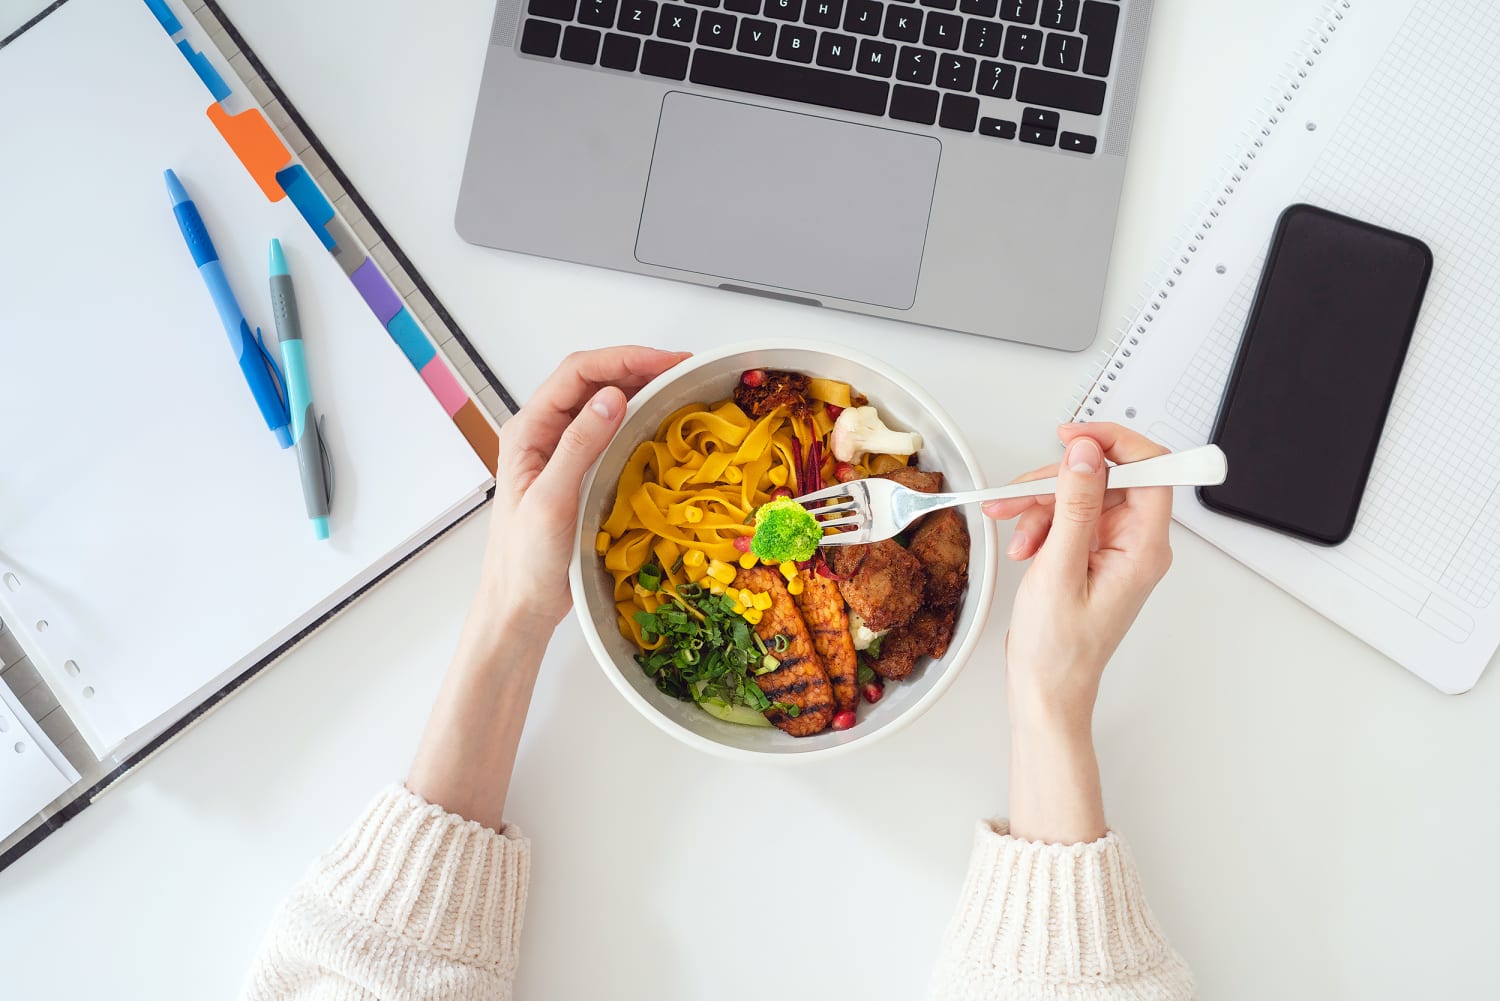 Cubicle cuisine: 4 delicious meals you can cook in the office